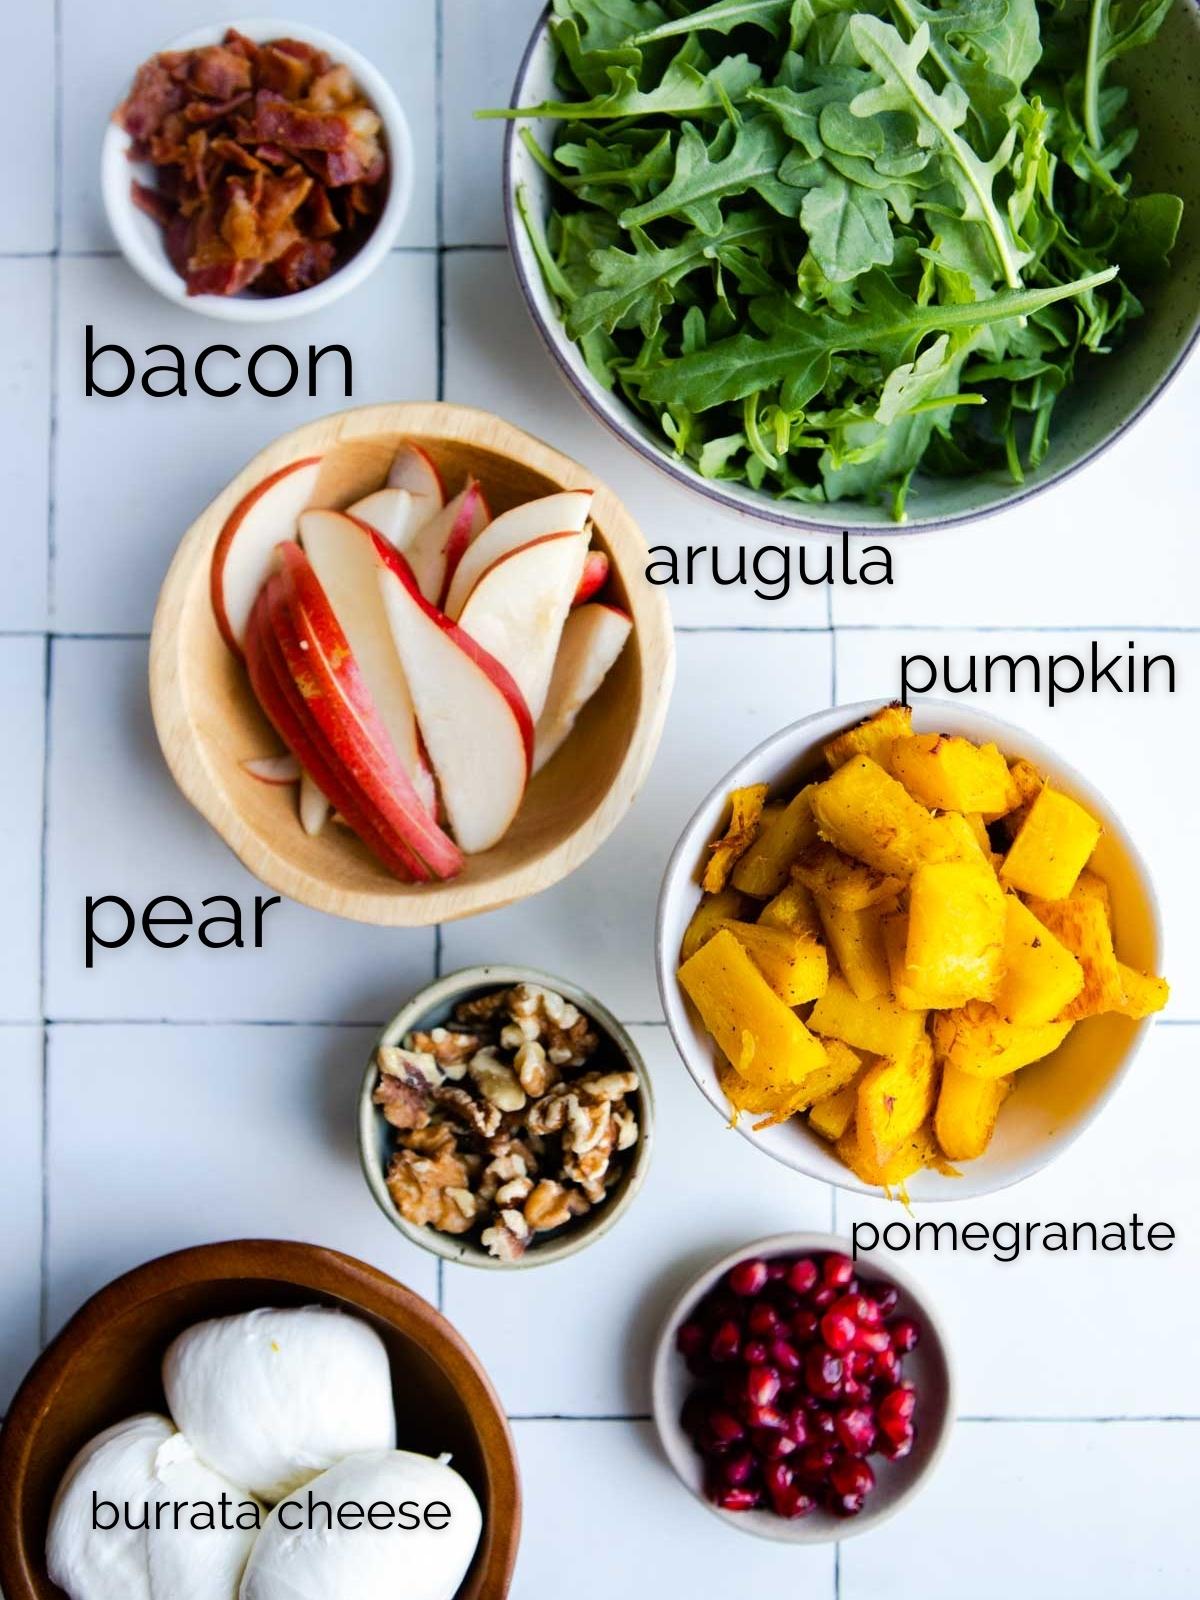 roasted pumpkin, sliced bacon, sliced pear, burrata, pomegranate seeds and walnuts and arugula in small round bowls ready to make a salad